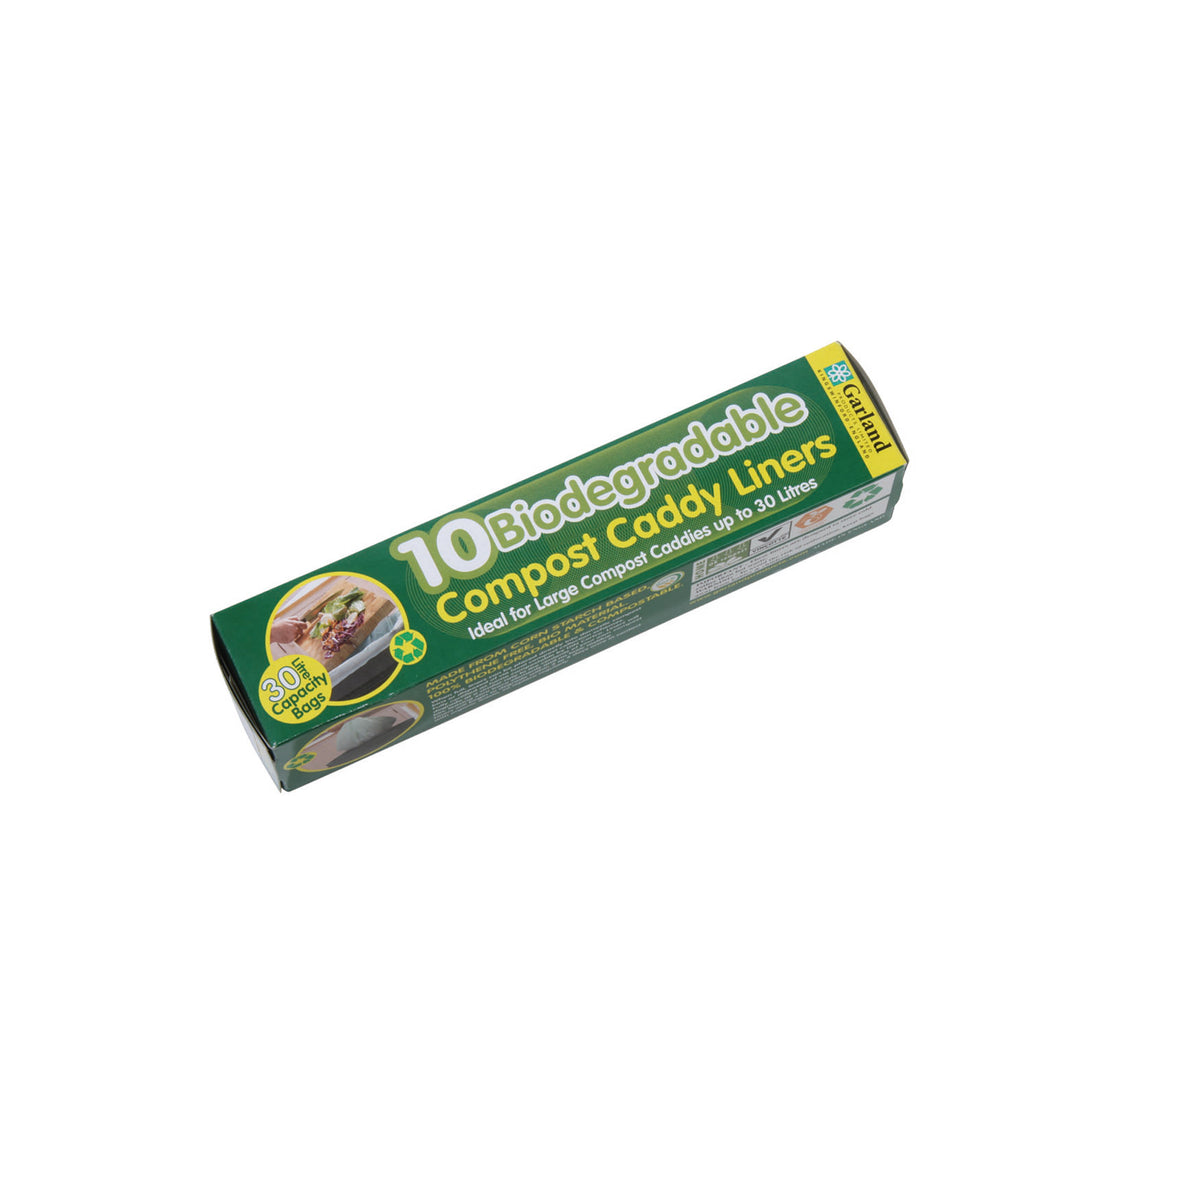 Biodegradable Caddy Liners for Jumbo Compost Caddy 10pk